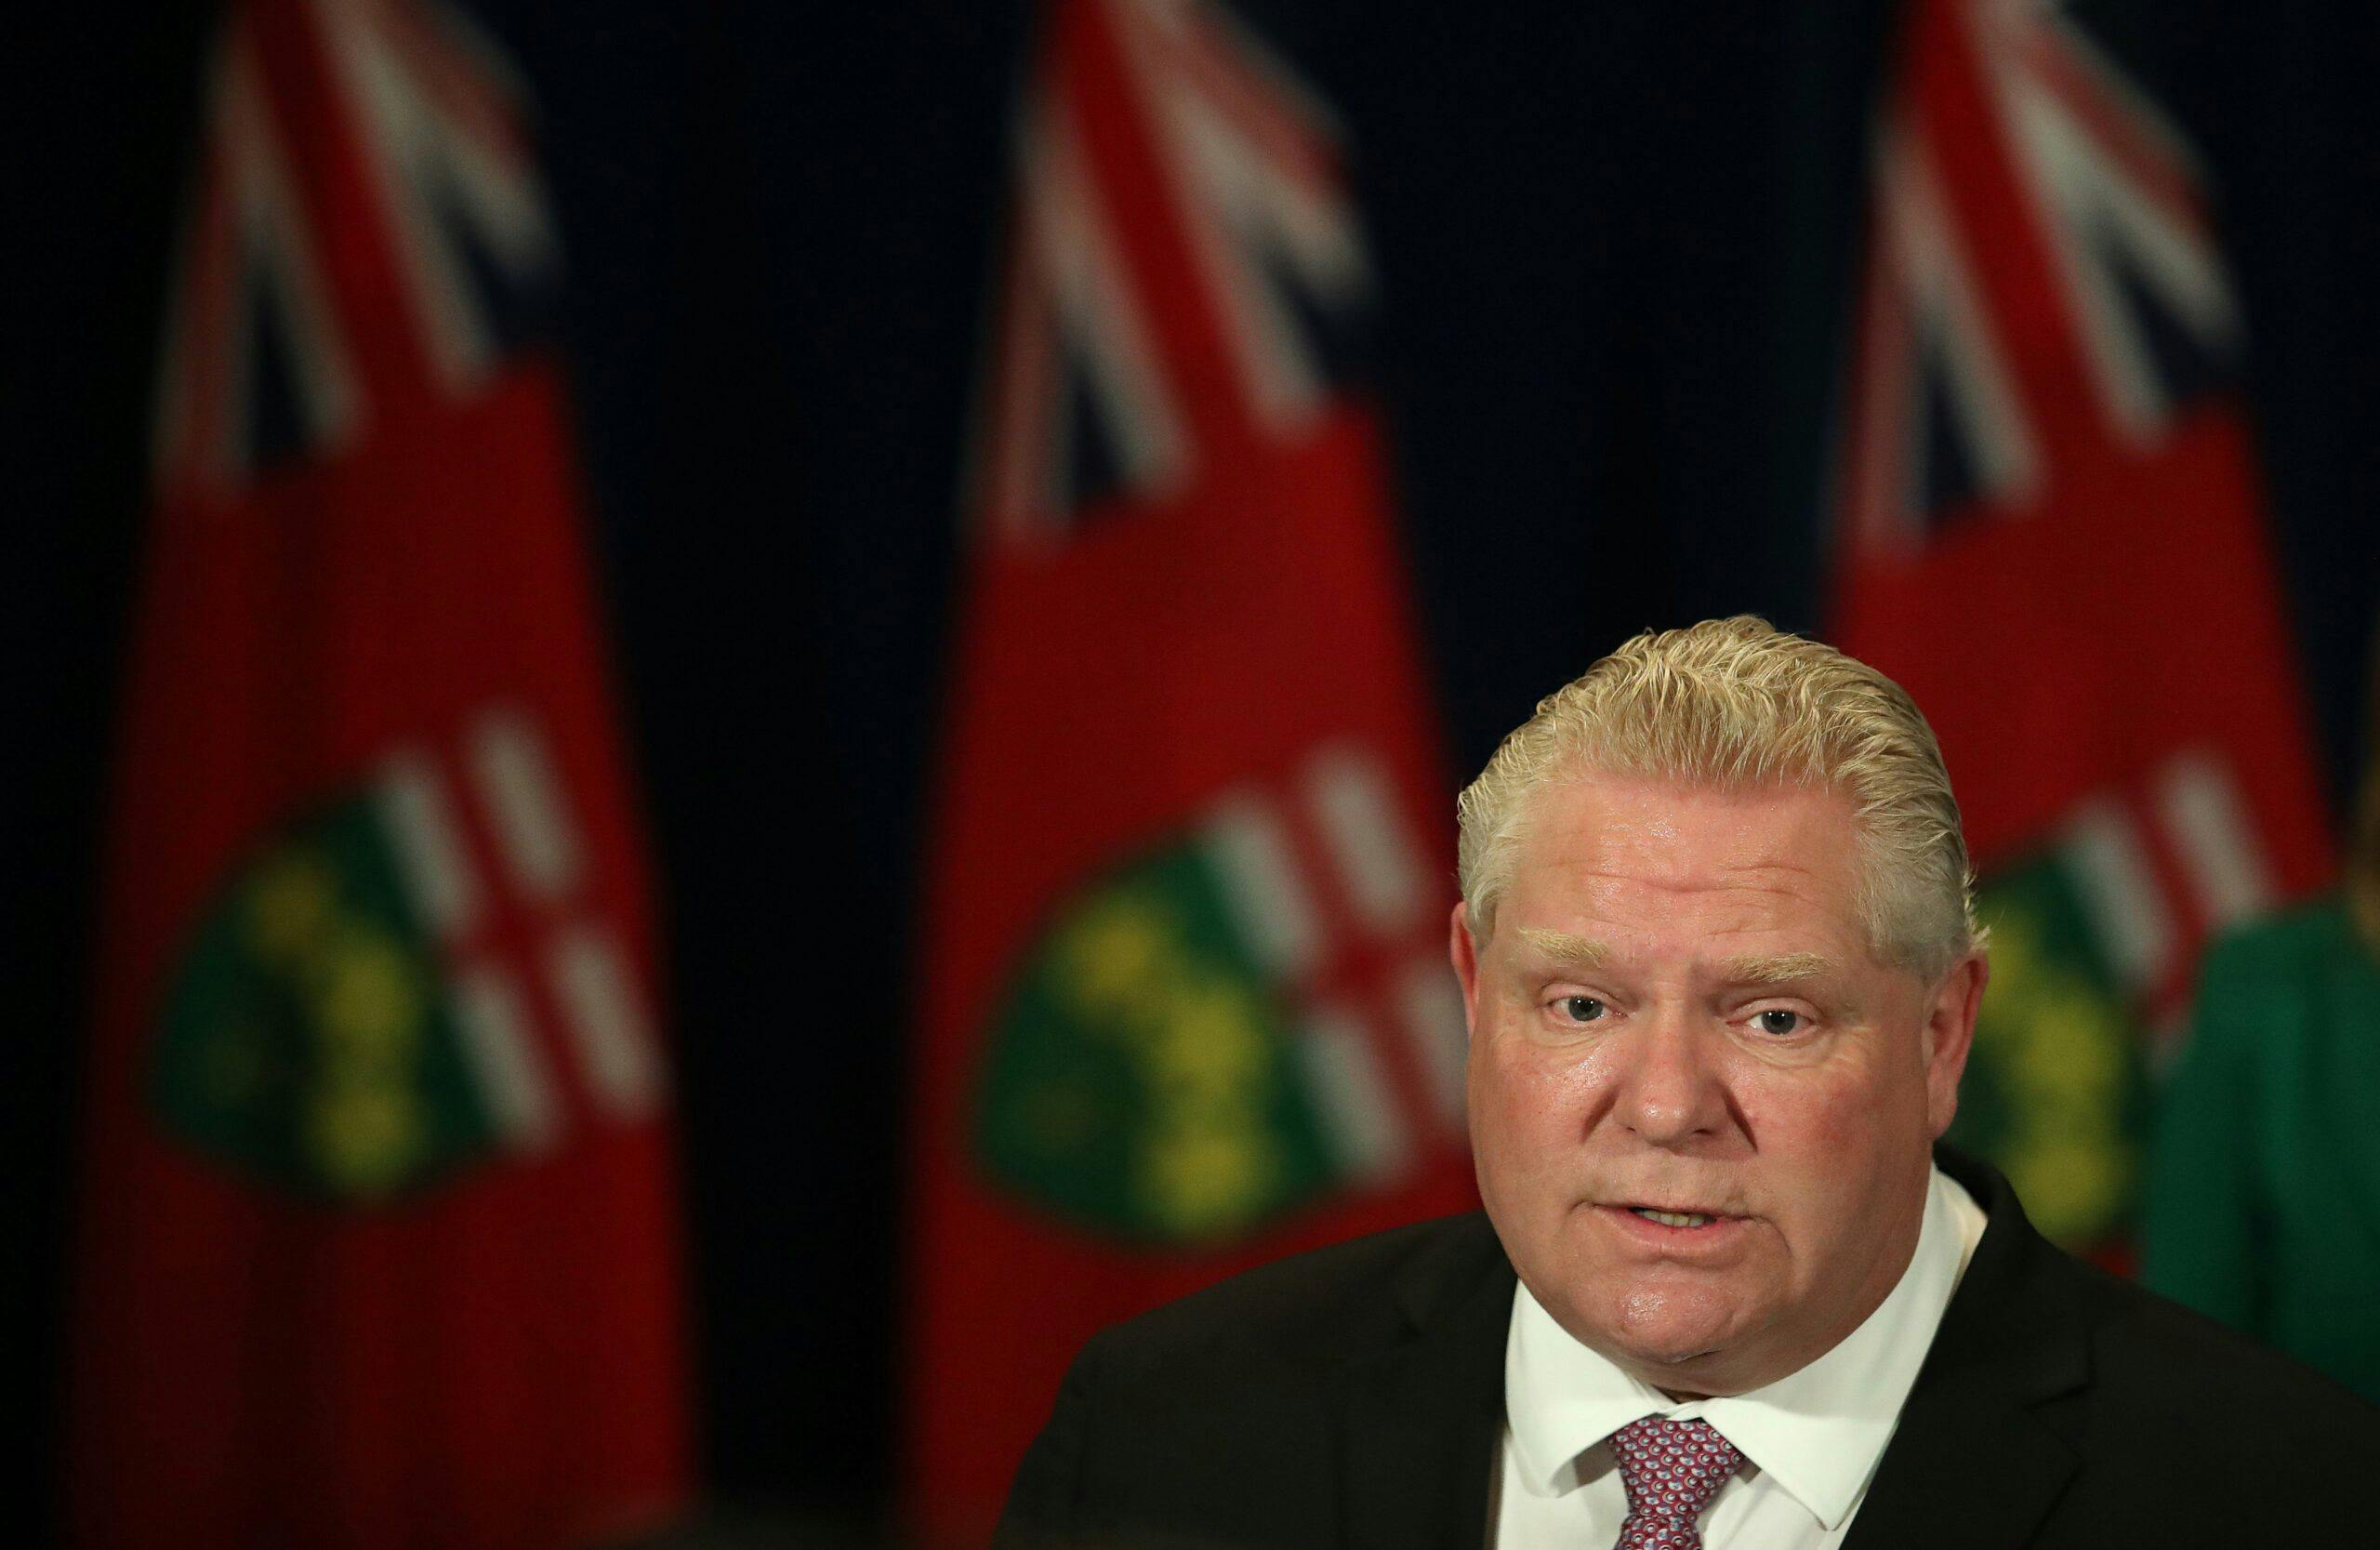 Premier Ford: ‘I get it’ if parents don’t want to vaccinate kids